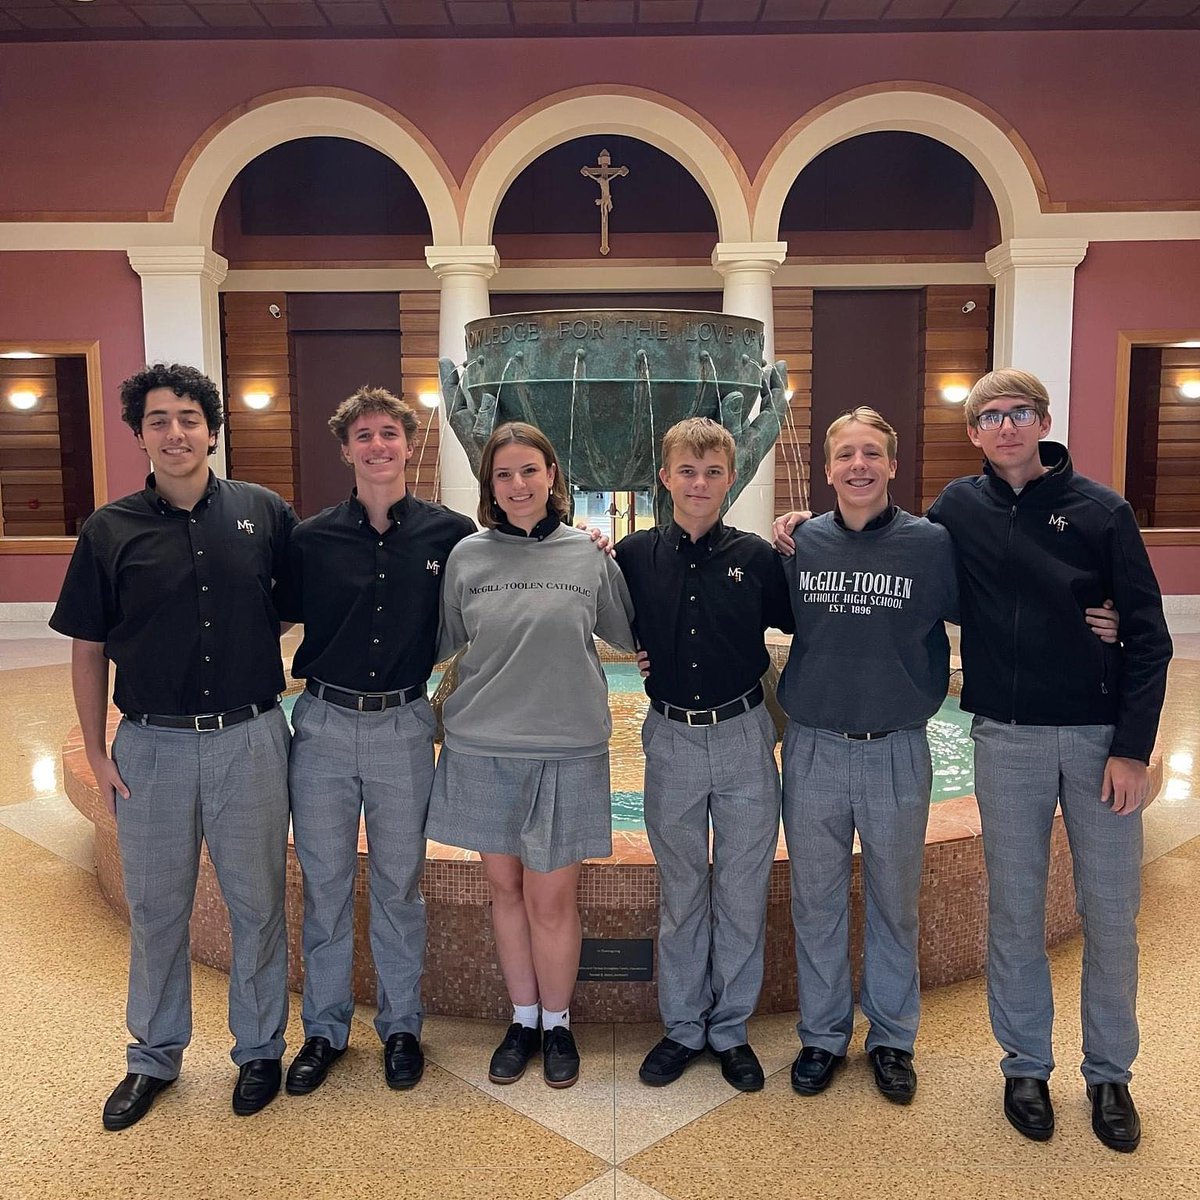 Congratulations to our National Merit Finalists! #FaithKnowledgeStrength All six of our semi-finalists have been recognized as finalists: Russell Ginn Anthony Hantouche Maggie Heller Christopher Hunt Brendan Russell Colson Tidikis